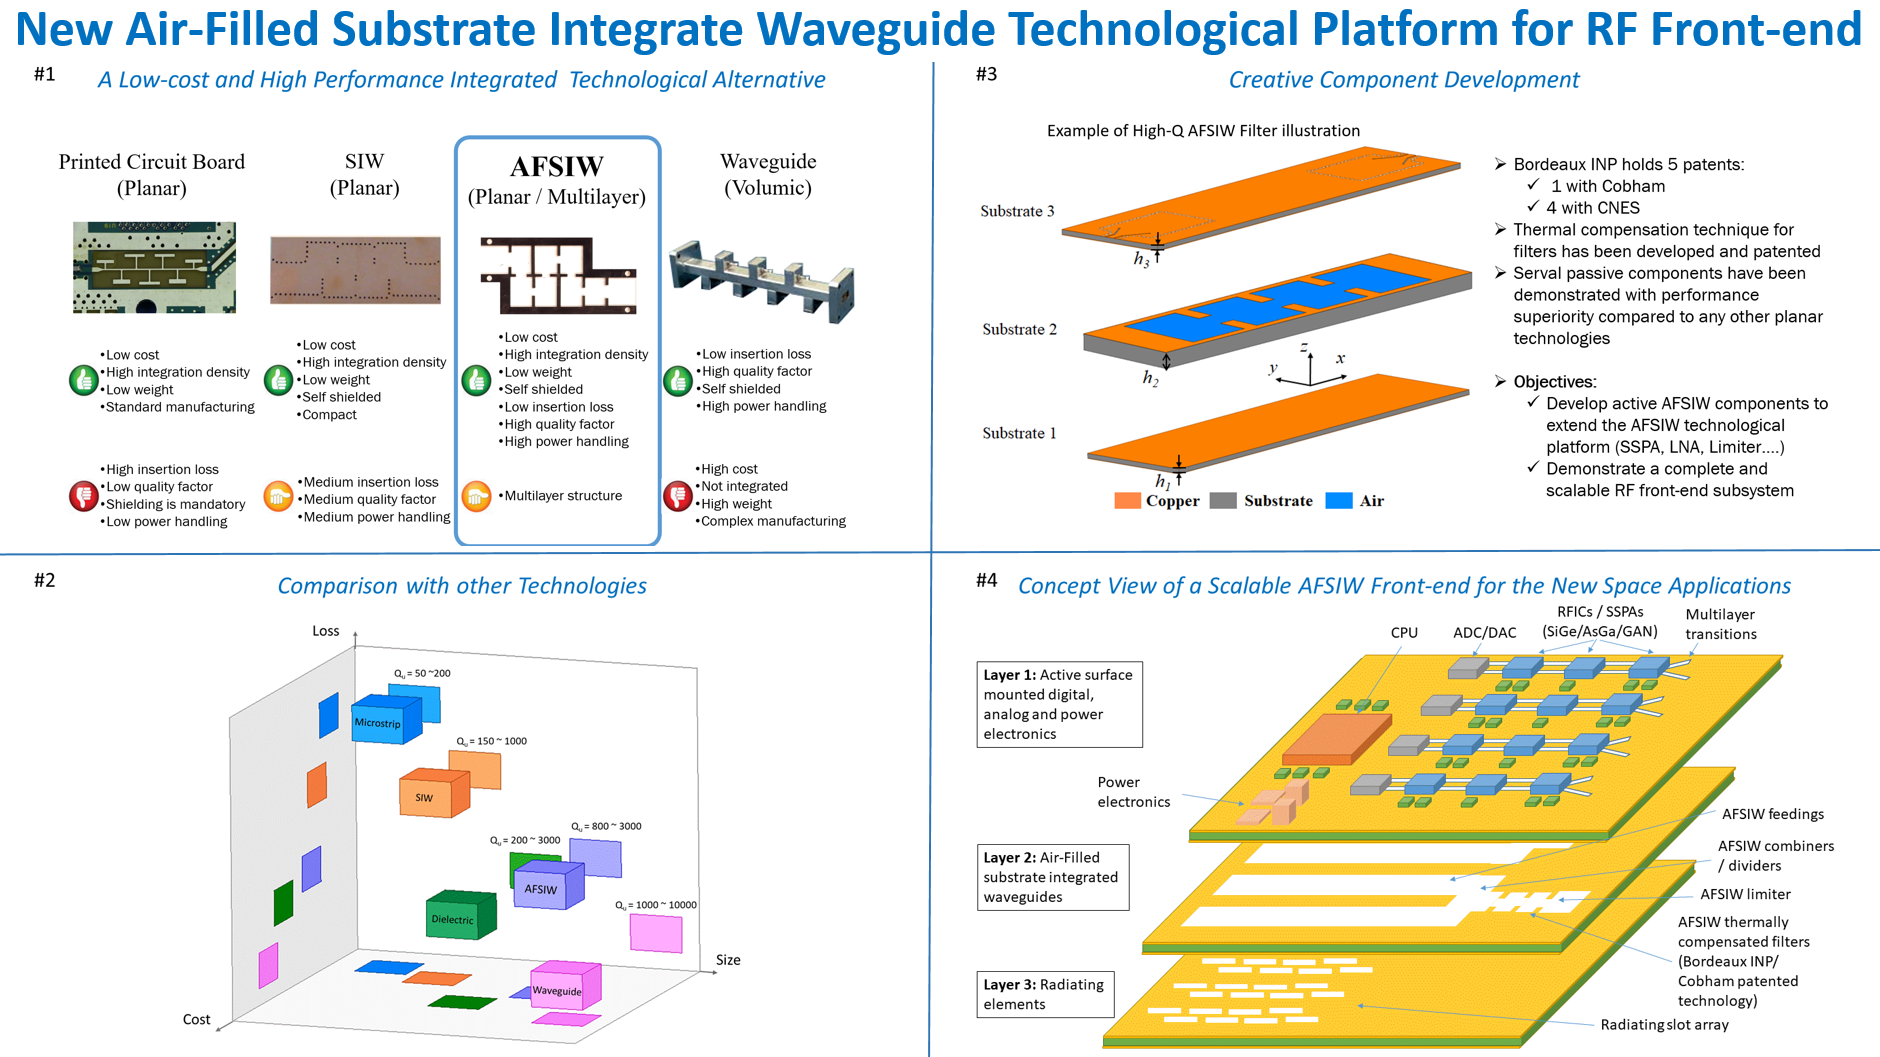 New Air-Filled Substrate Integrate Waveguide Technological Platform for RF Front-end